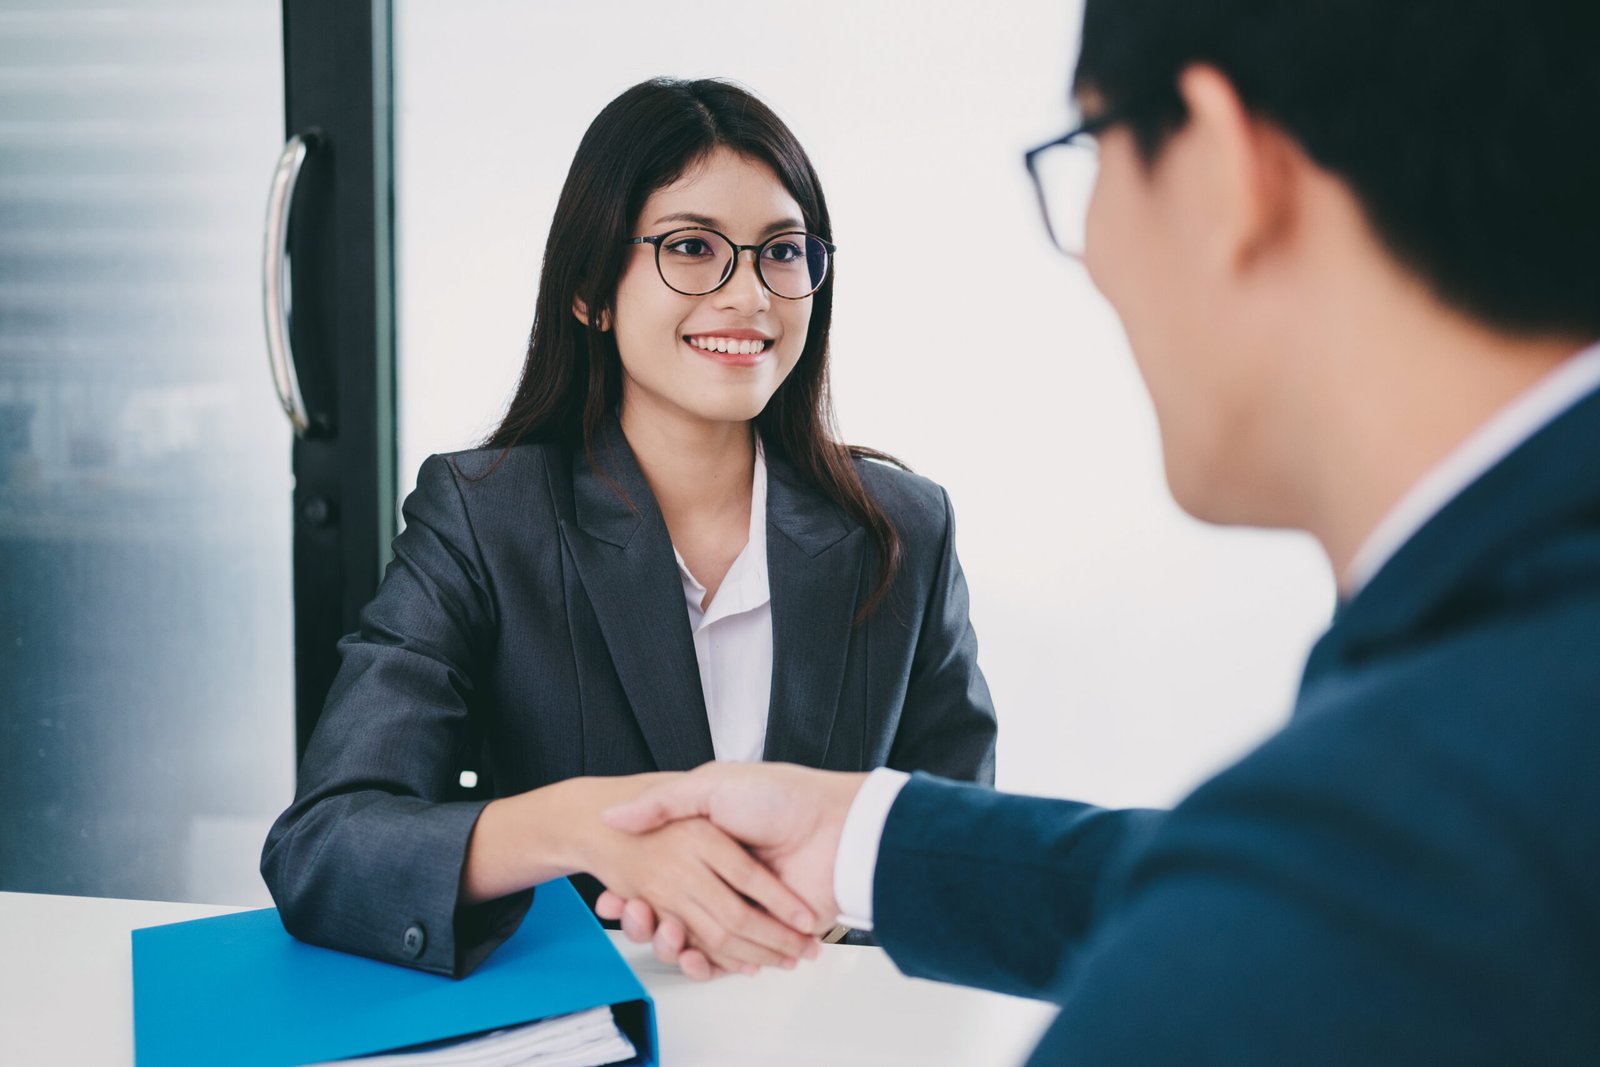 Job Applicant Having Interview. Handshake While Job Interviewing